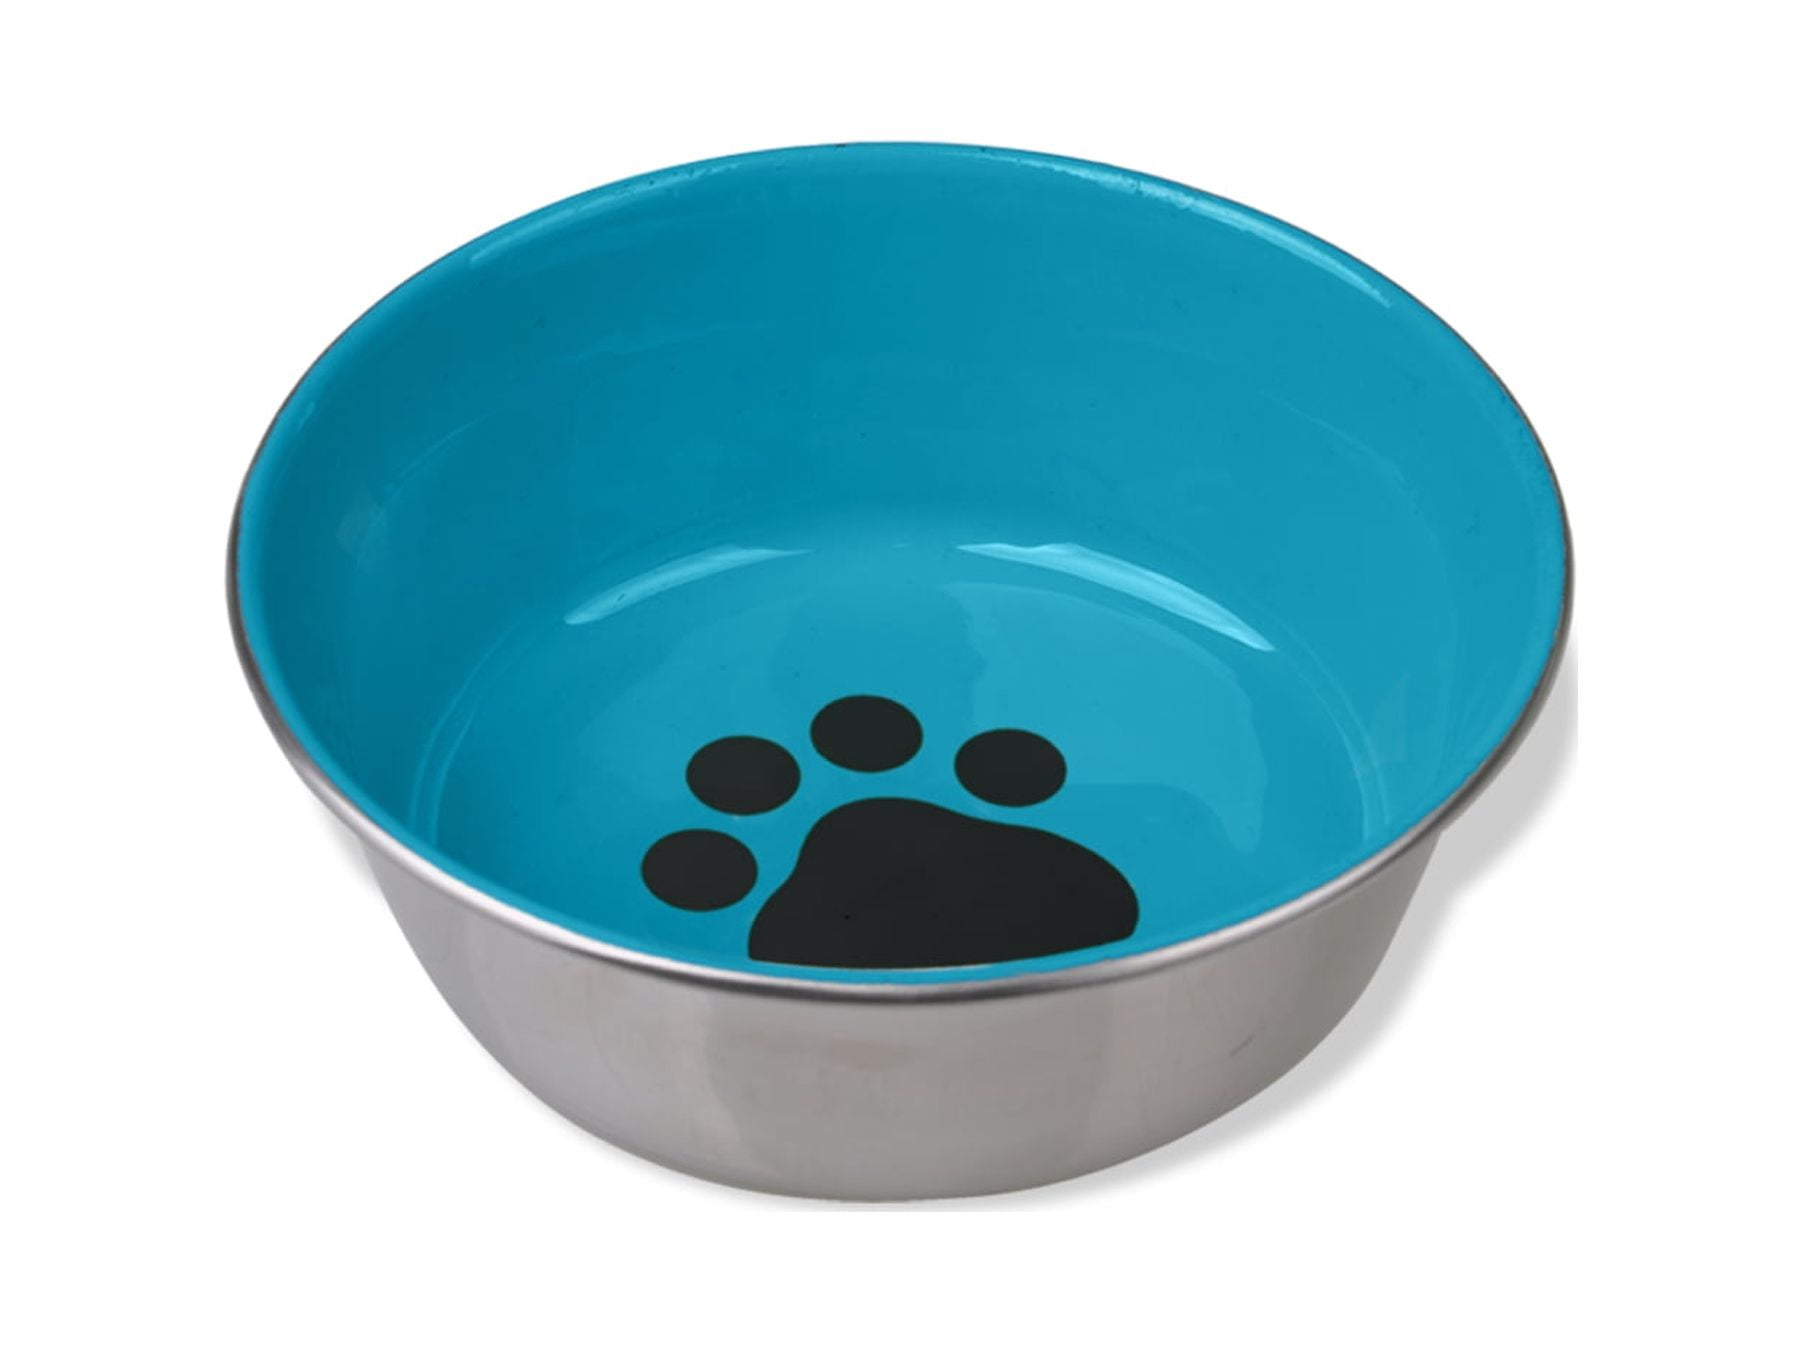 24 Oz Stainless Steel Non-skid Dog Dish With Decorated Enamel Interior - Assorted